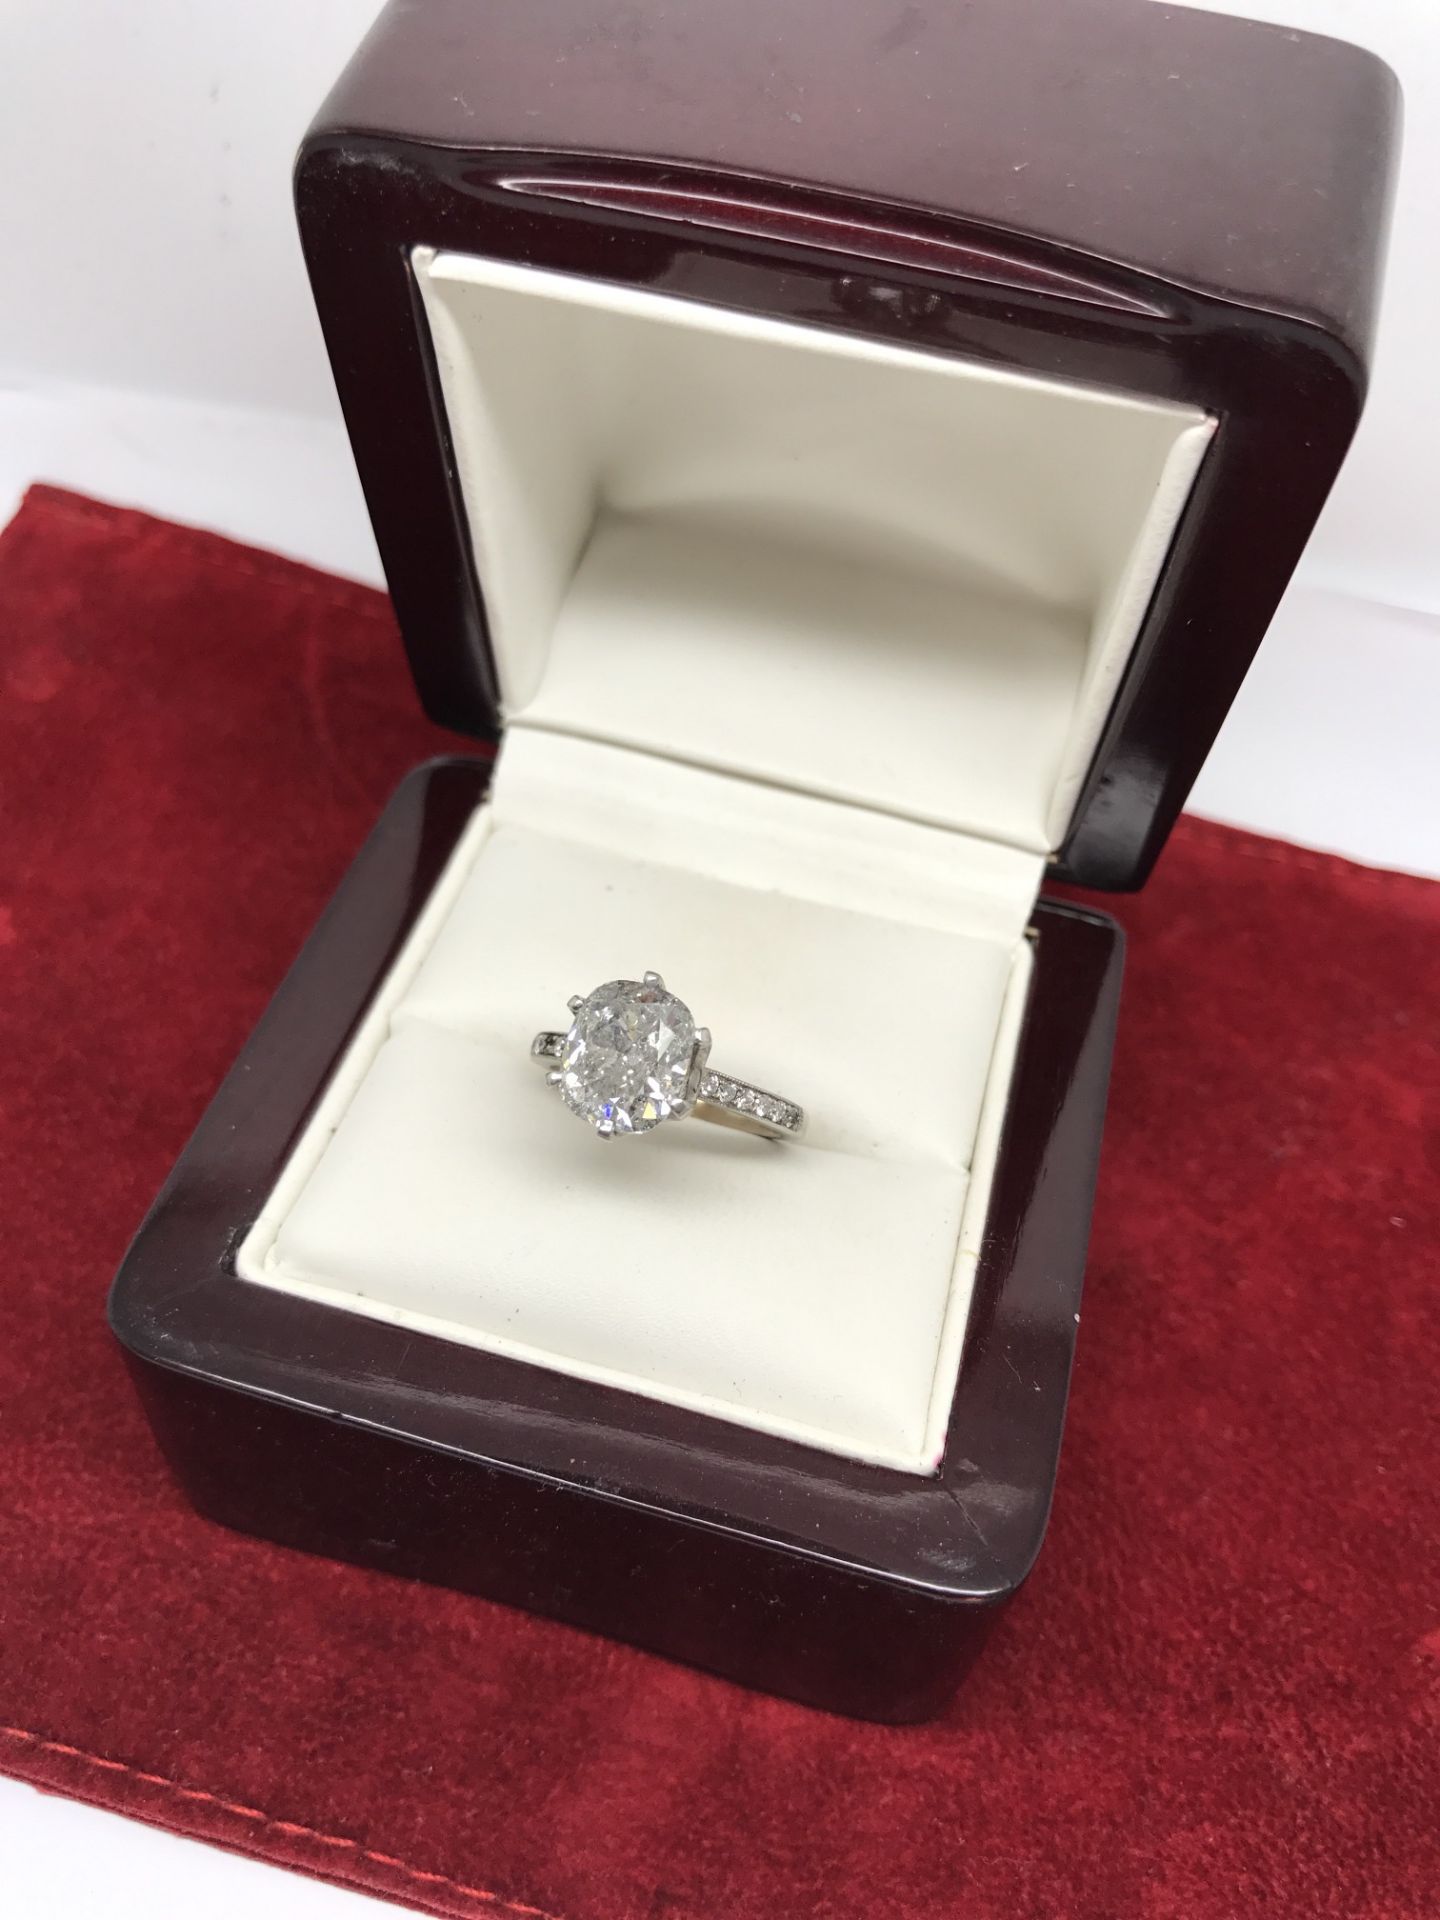 APPROX 3.75ct DIAMOND SOLITAIRE RING SET IN WHITE GOLD - Image 2 of 4